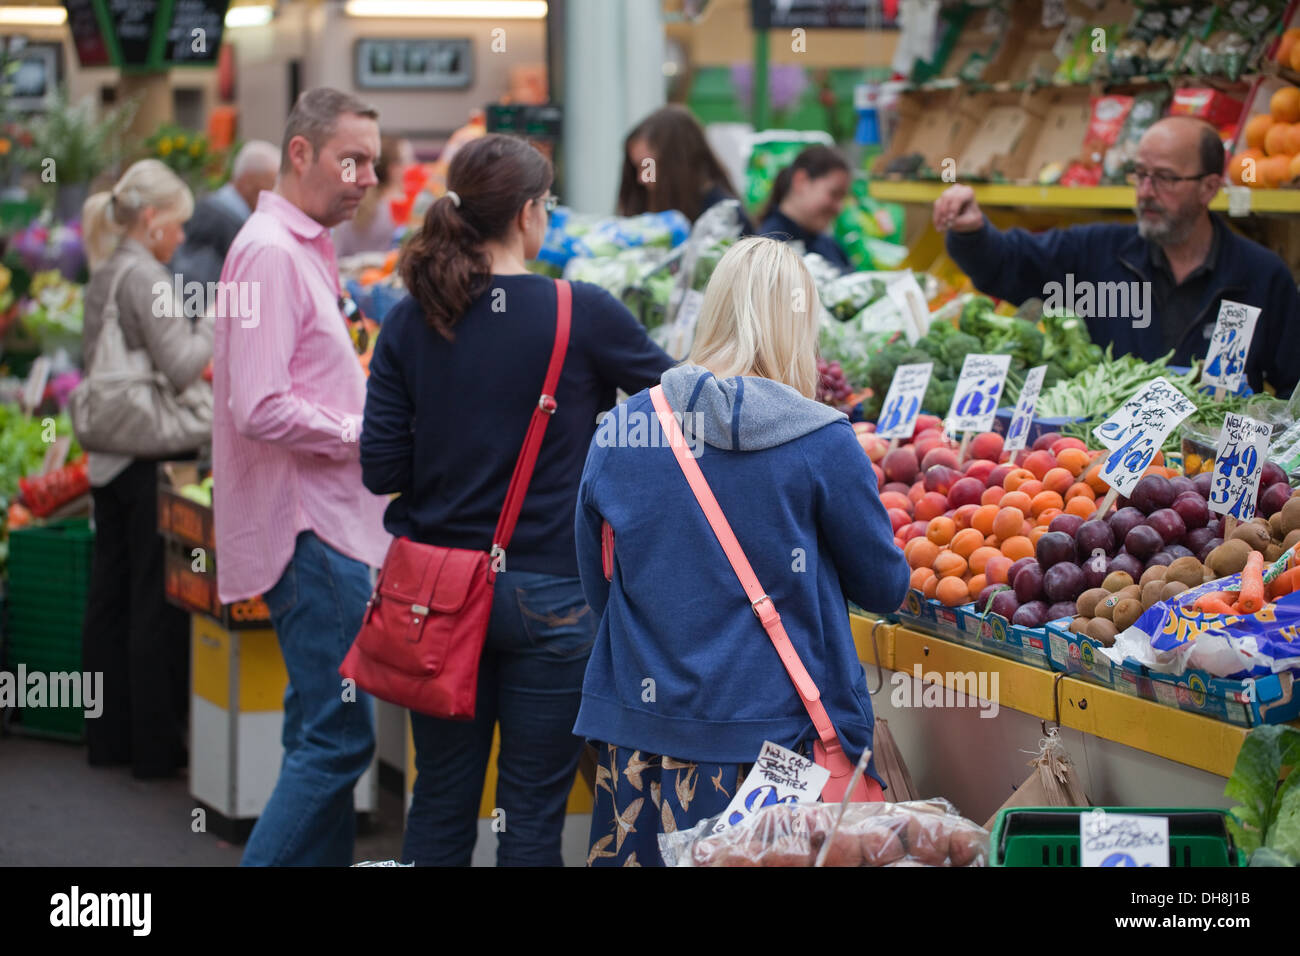 Central Market. Fruit and vegetable stall. Halkett Place. St Helier. Jersey. Channel Islands. England. UK. Stock Photo